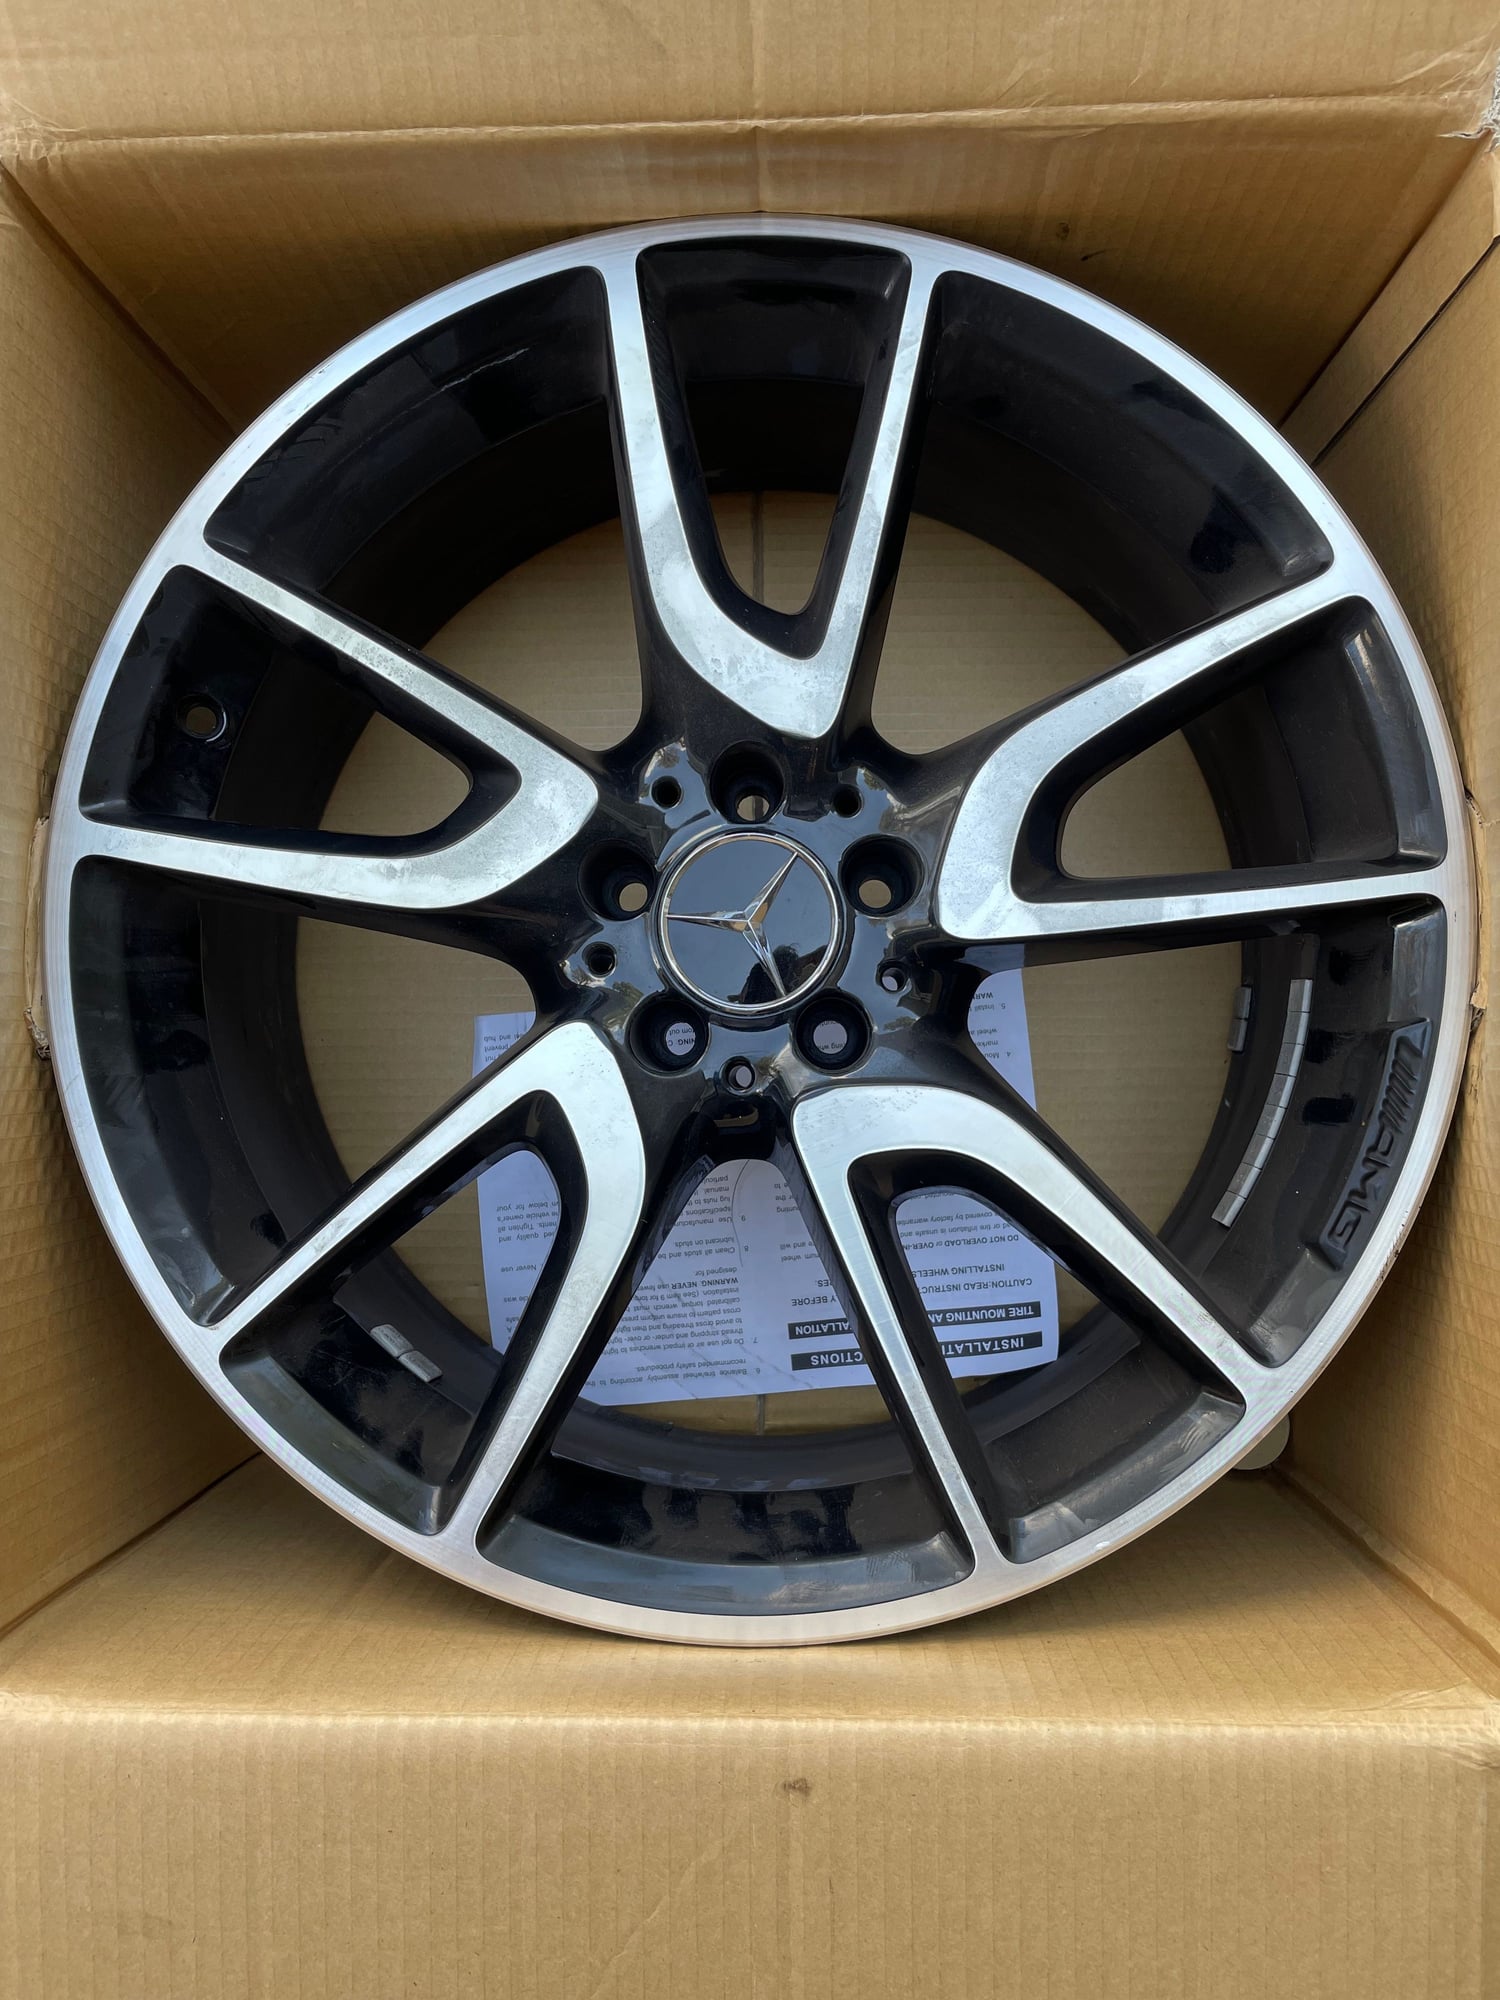 Wheels and Tires/Axles - 2017 e43 AMG 20 inch wheels for sale - fits E300 E320 E350 E500 E550 - Used - 2016 to 2023 Mercedes-Benz E43 AMG - West Lafayette, IN 47906, United States